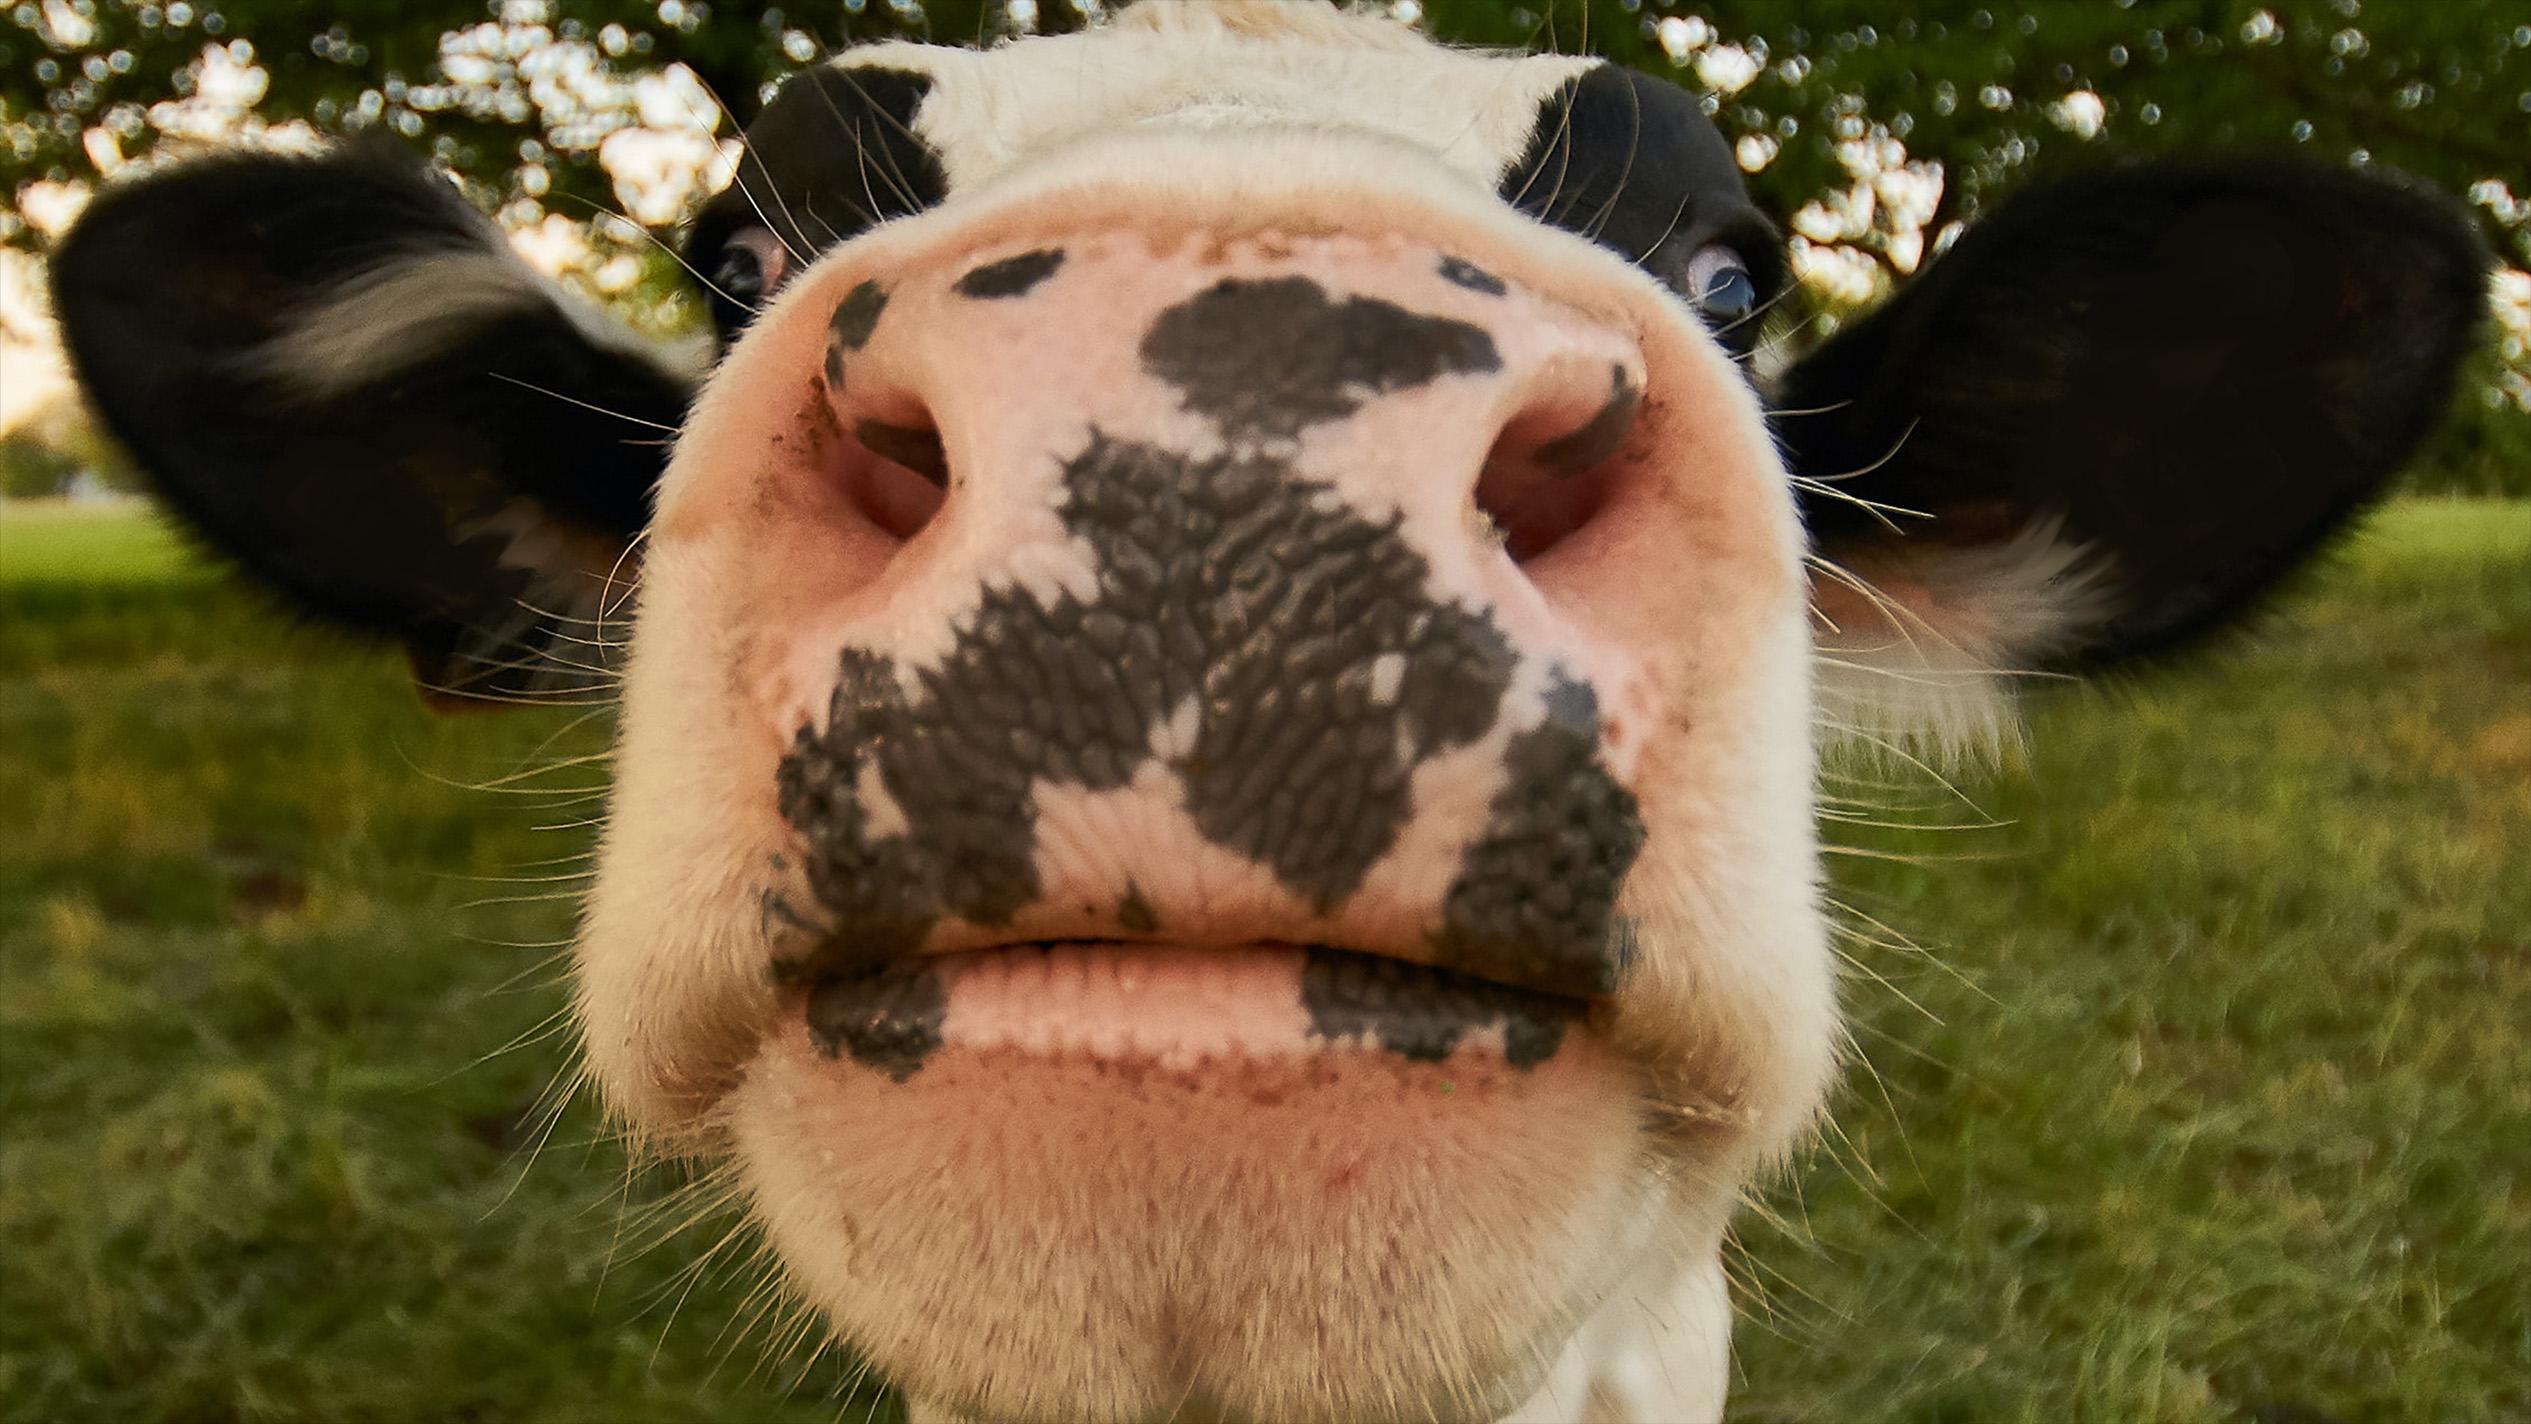 personal view of a curious cow sniffing the camera